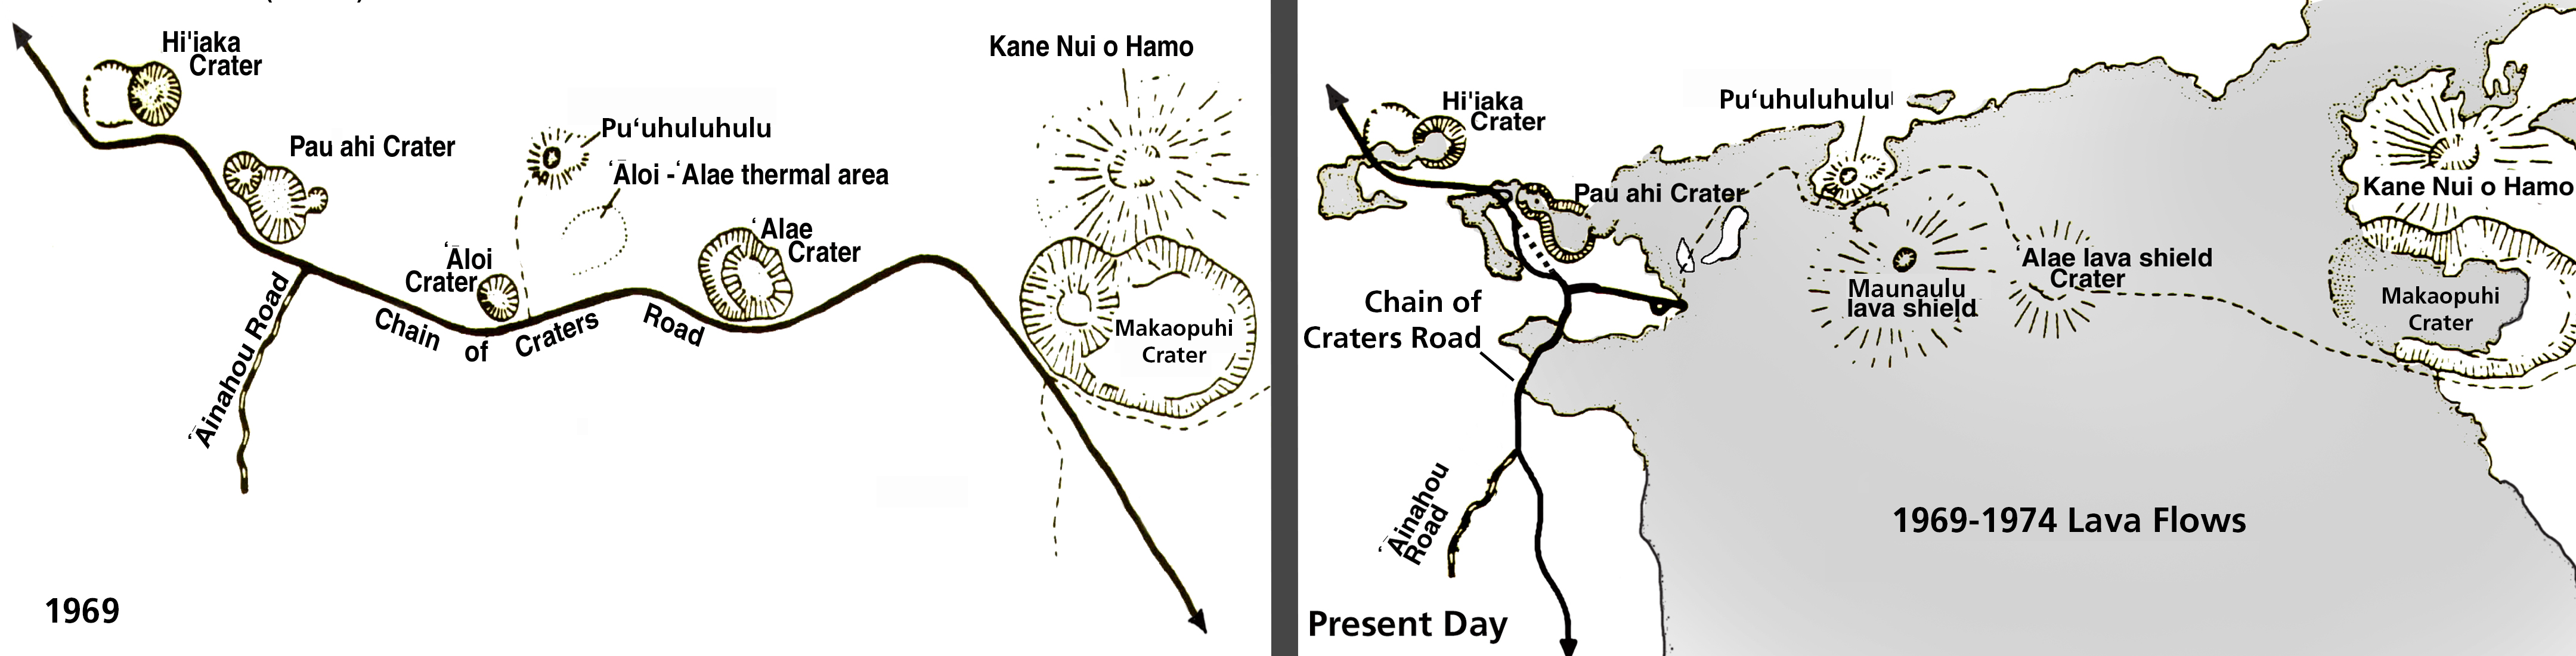 Grayscale animated map of the area around Maunaulu, before and after the 1969-1974 eruption